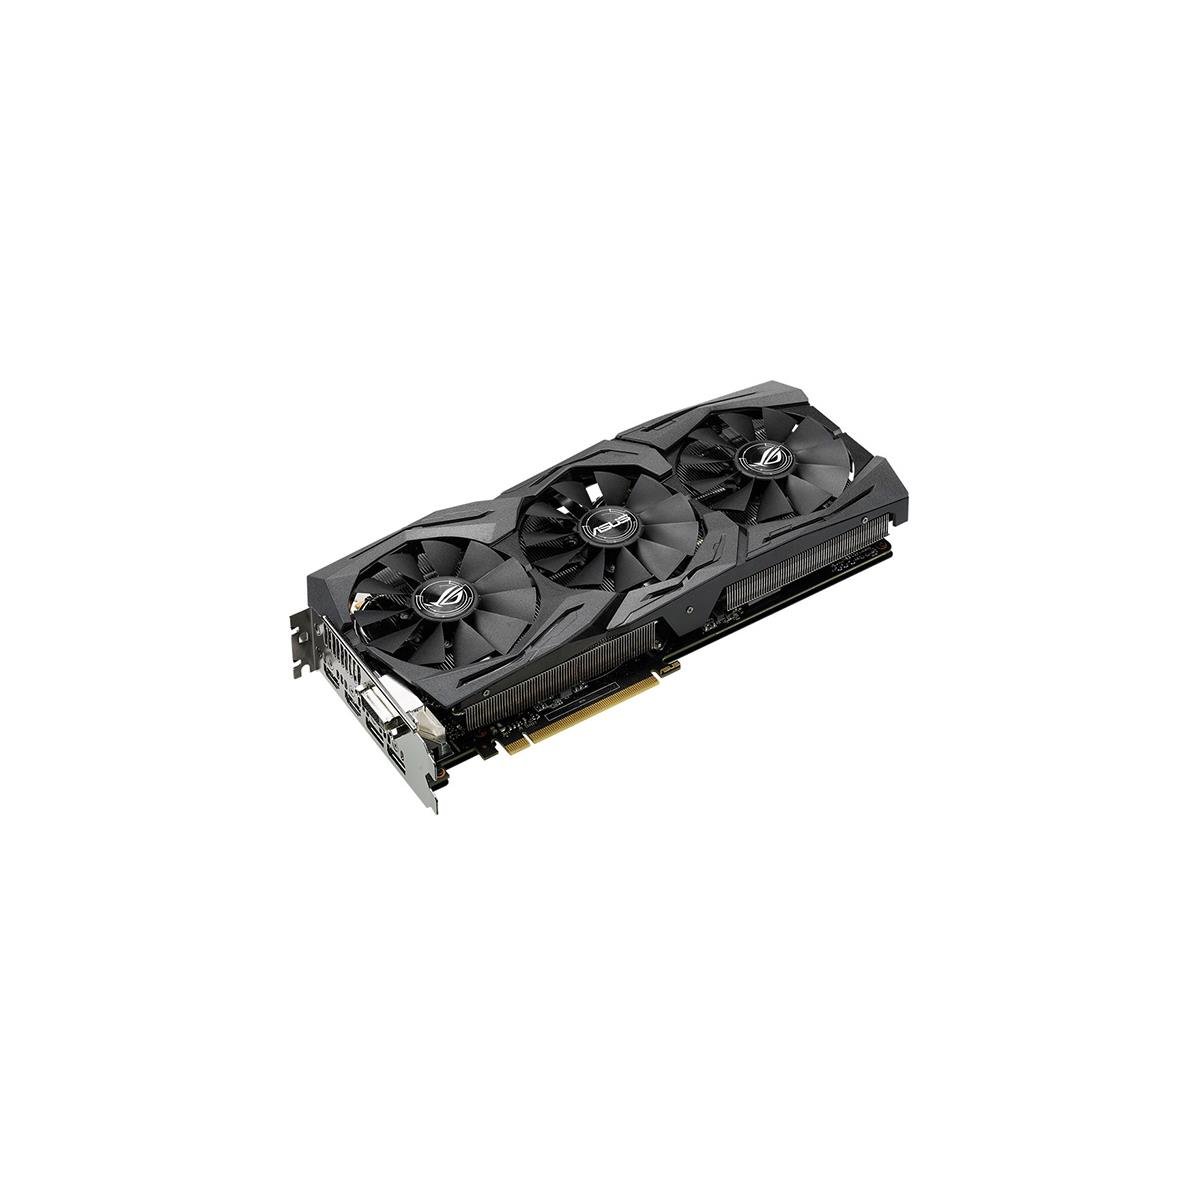 Asus Rog Strix Amd Radeon Rx 580 And 570 Cards Break Cover In Euro Etailer Listing Hothardware